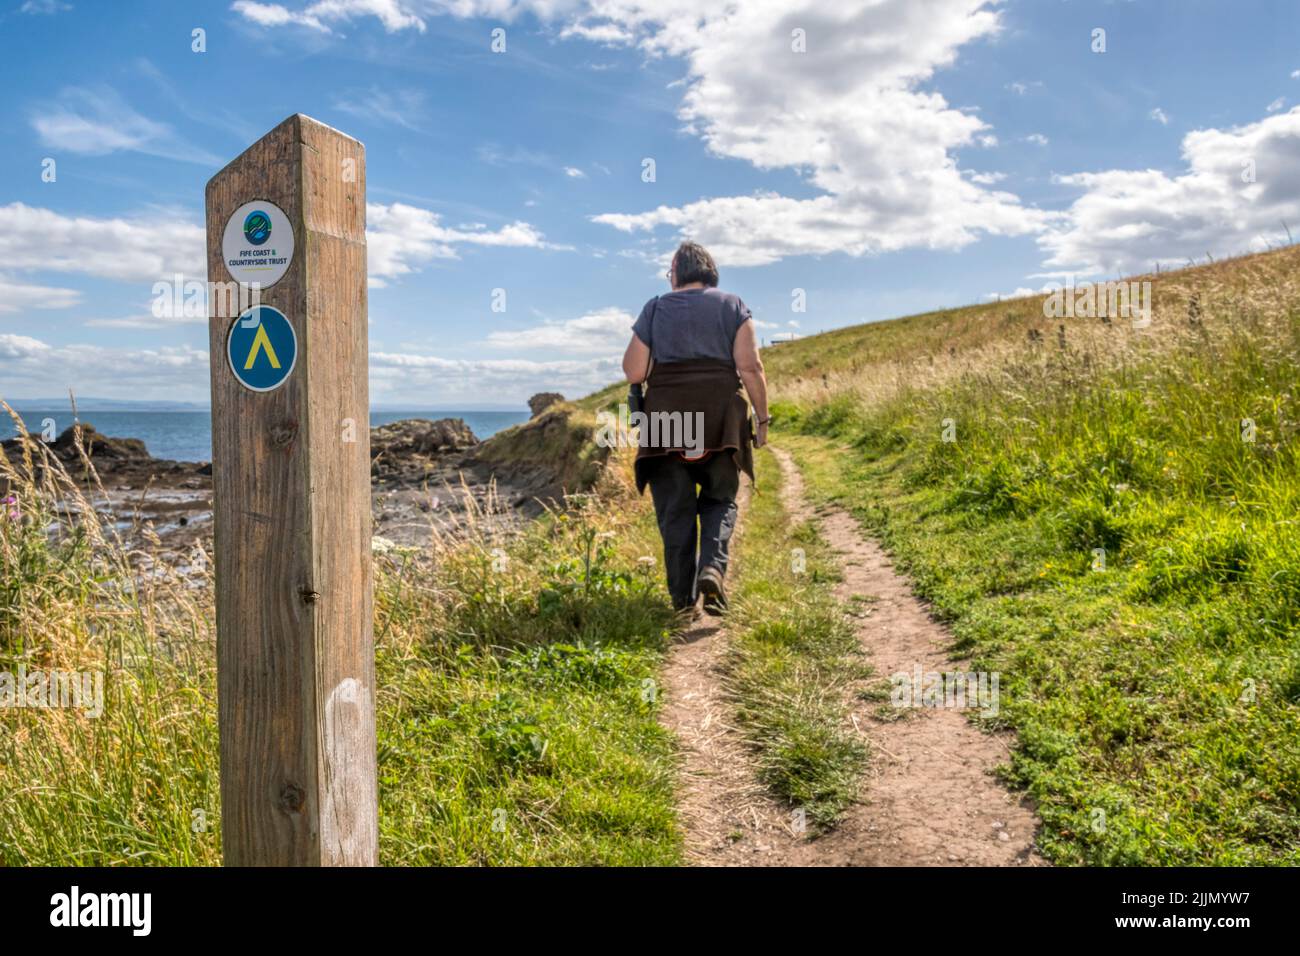 A waymark & direction arrow with a woman walking the Fife Coastal Path at St Monans in the East Neuk of Fife, Scotland. Stock Photo